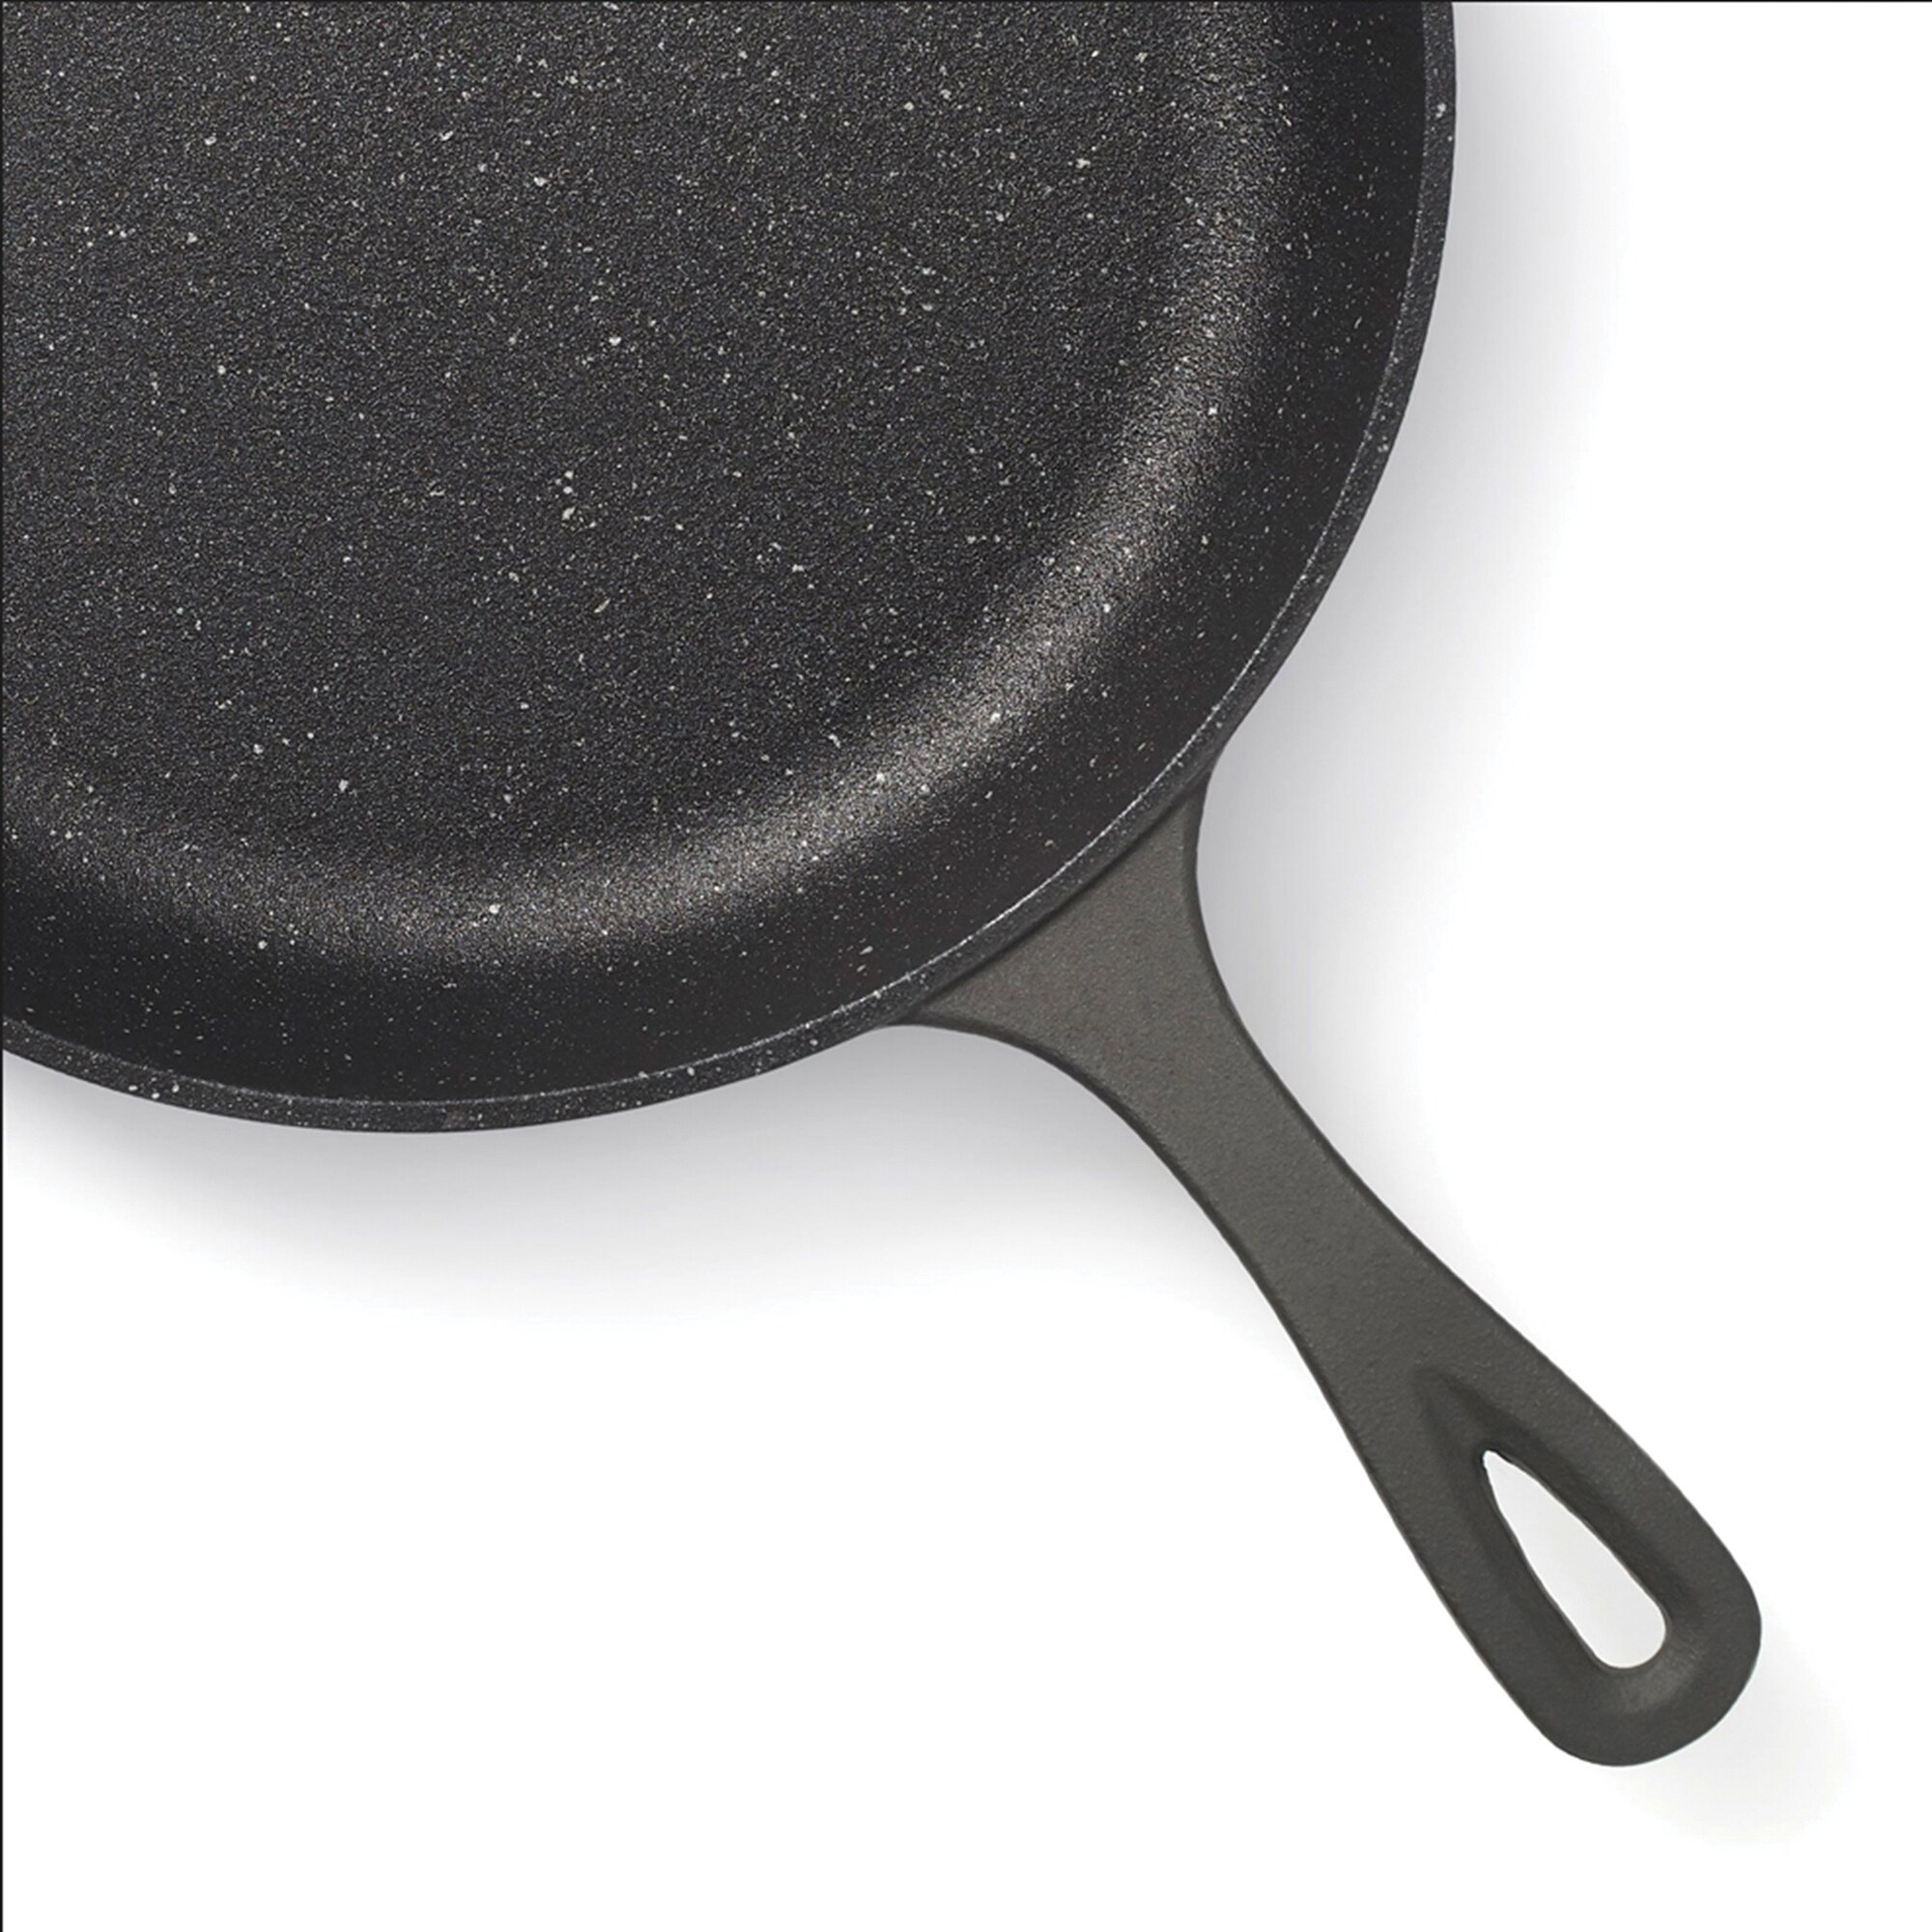 The Rock by Starfrit 12 in. Cast Iron Skillet, Black